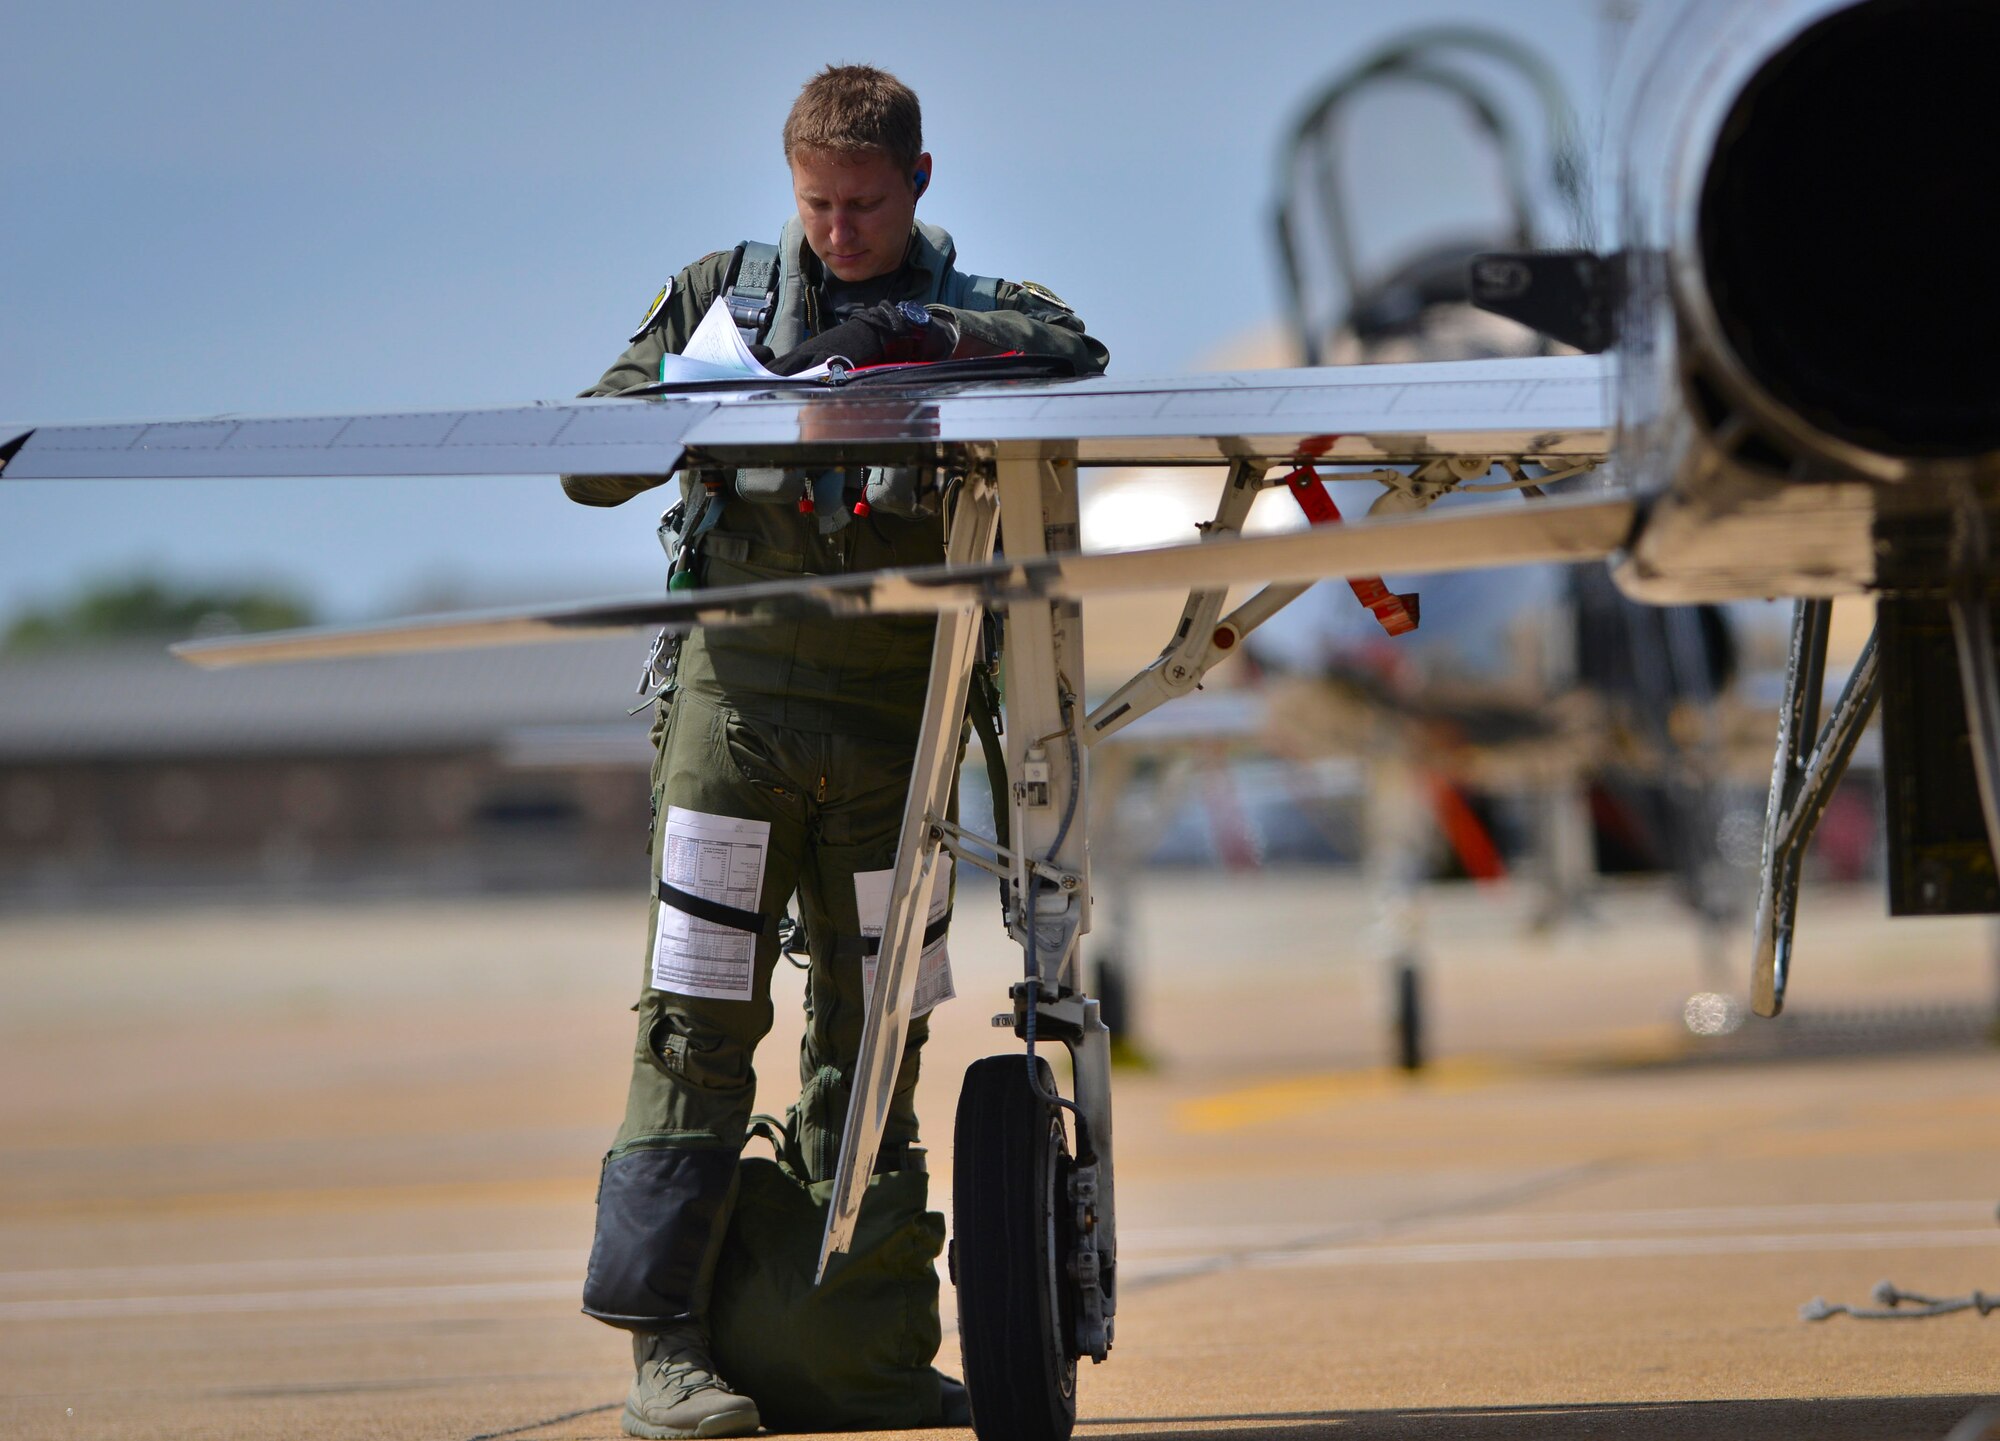 U.S. Air Force Maj. Nathaniel Lightfoot, 71st Fighter Training Squadron aggressor pilot, fills out a mission data sheet after returning from an air combat training mission during ATLANTICTRIDENT 17 at Joint Base Langley-Eustis, Va., April 18, 2016. The exercise's intent is to allow for the sharing and development of techniques, tactics, and procedures between U.S. Air Force, French Air Force, and Royal Air Force frontline fighters in order to fly, fight, and win in modern highly-contested, anti-access/area denial environments. (U.S. Air Force photo/Staff Sgt. Natasha Stannard)